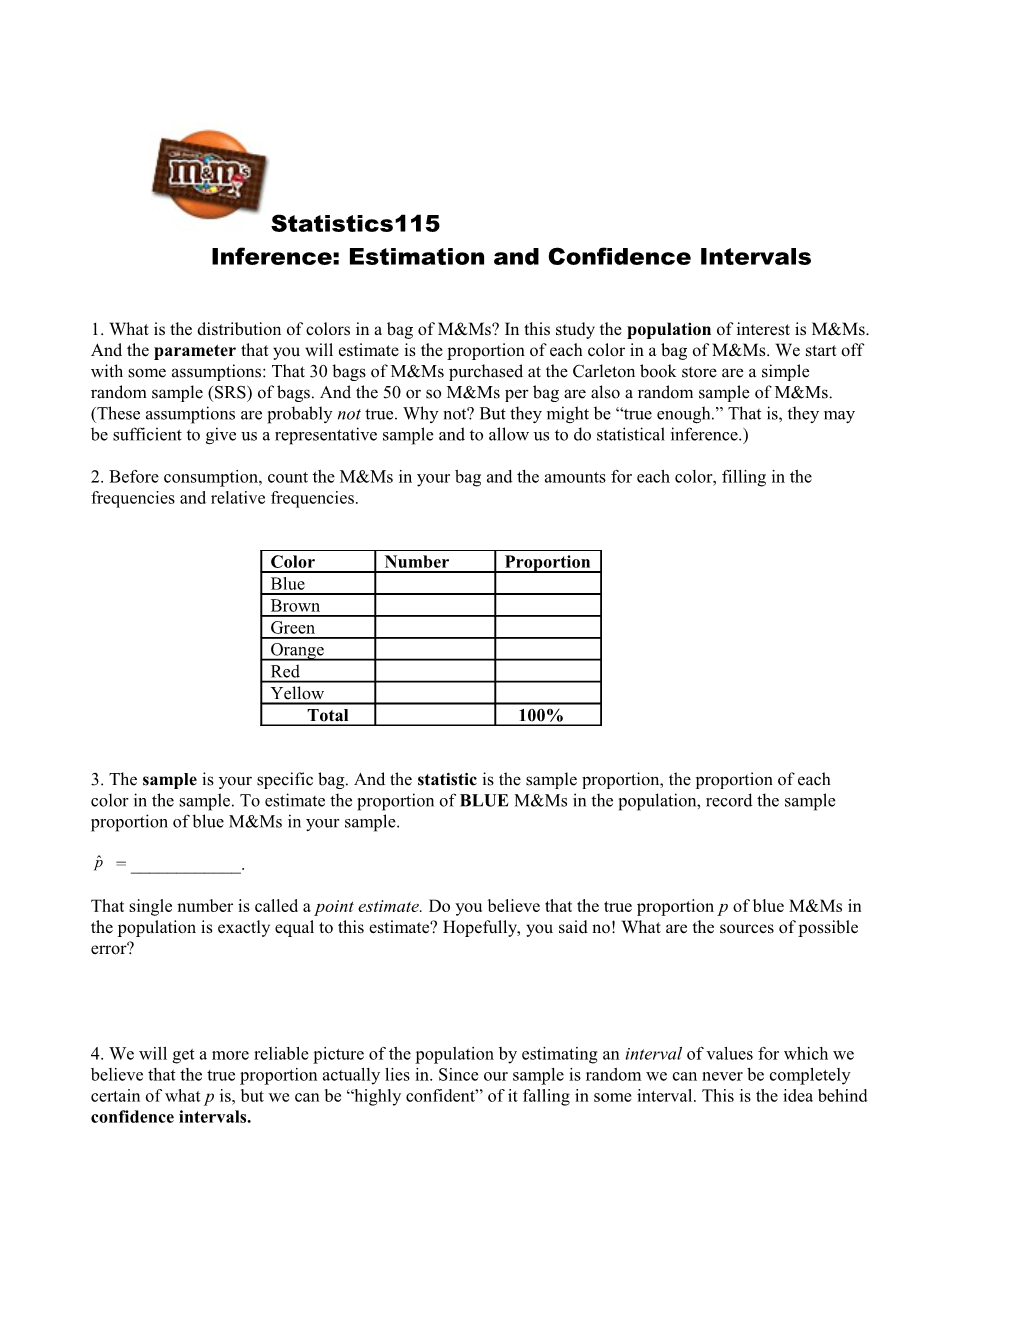 Inference: Estimation and Confidence Intervals